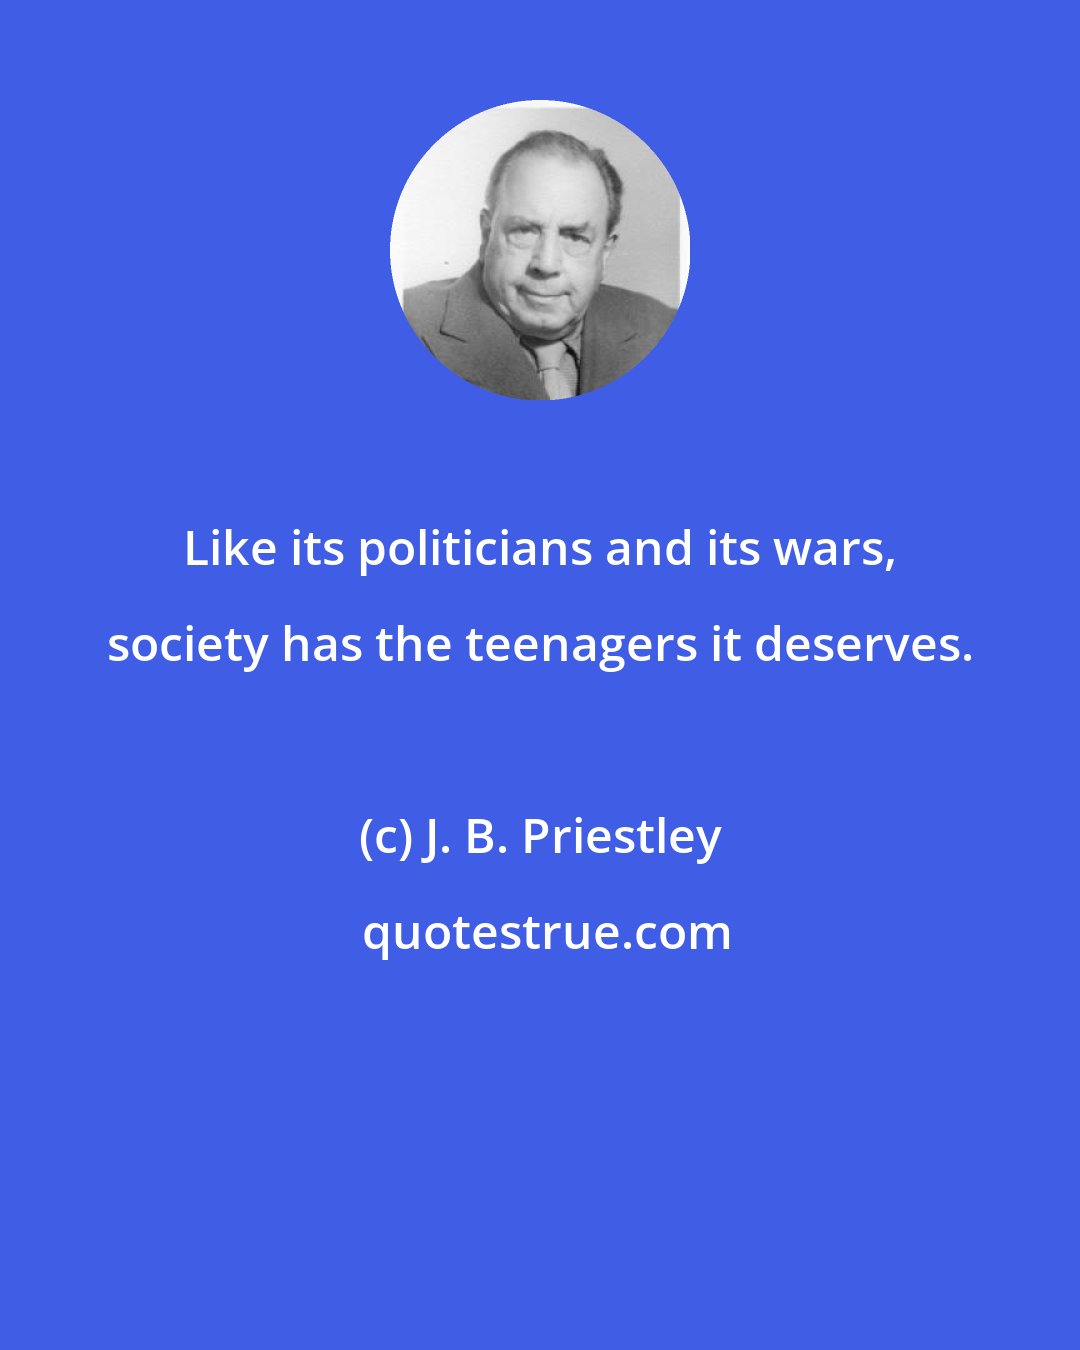 J. B. Priestley: Like its politicians and its wars, society has the teenagers it deserves.